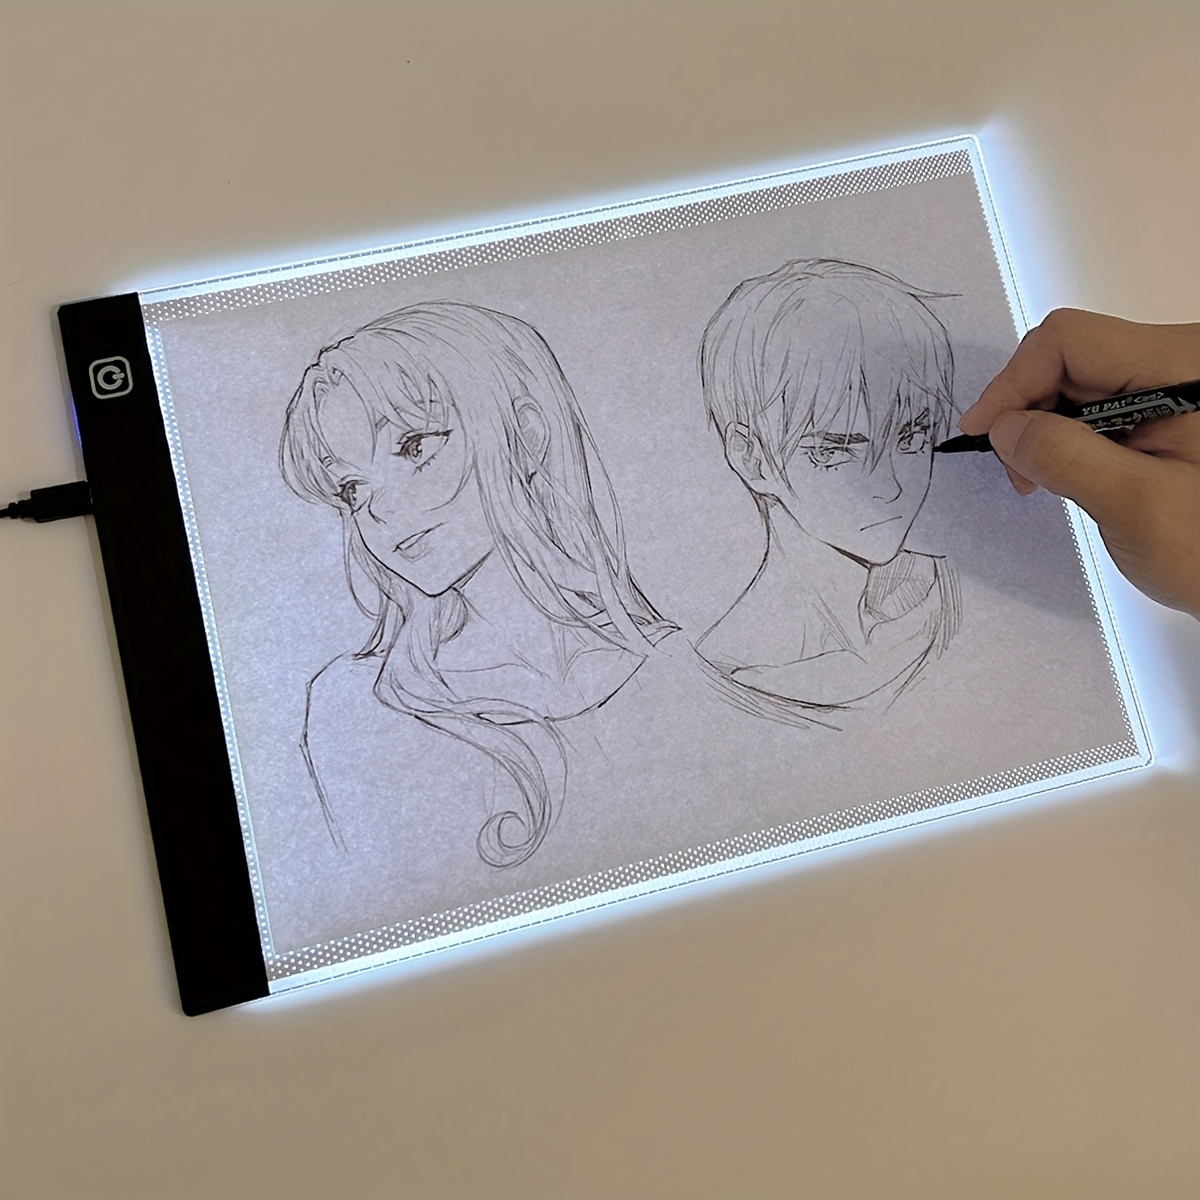 1pc led drawing replica board toy drawing 3 levels dimmable painting tablet a4 size light pad learning educational game gift multicolor optional no magnetic suction no inner electricity